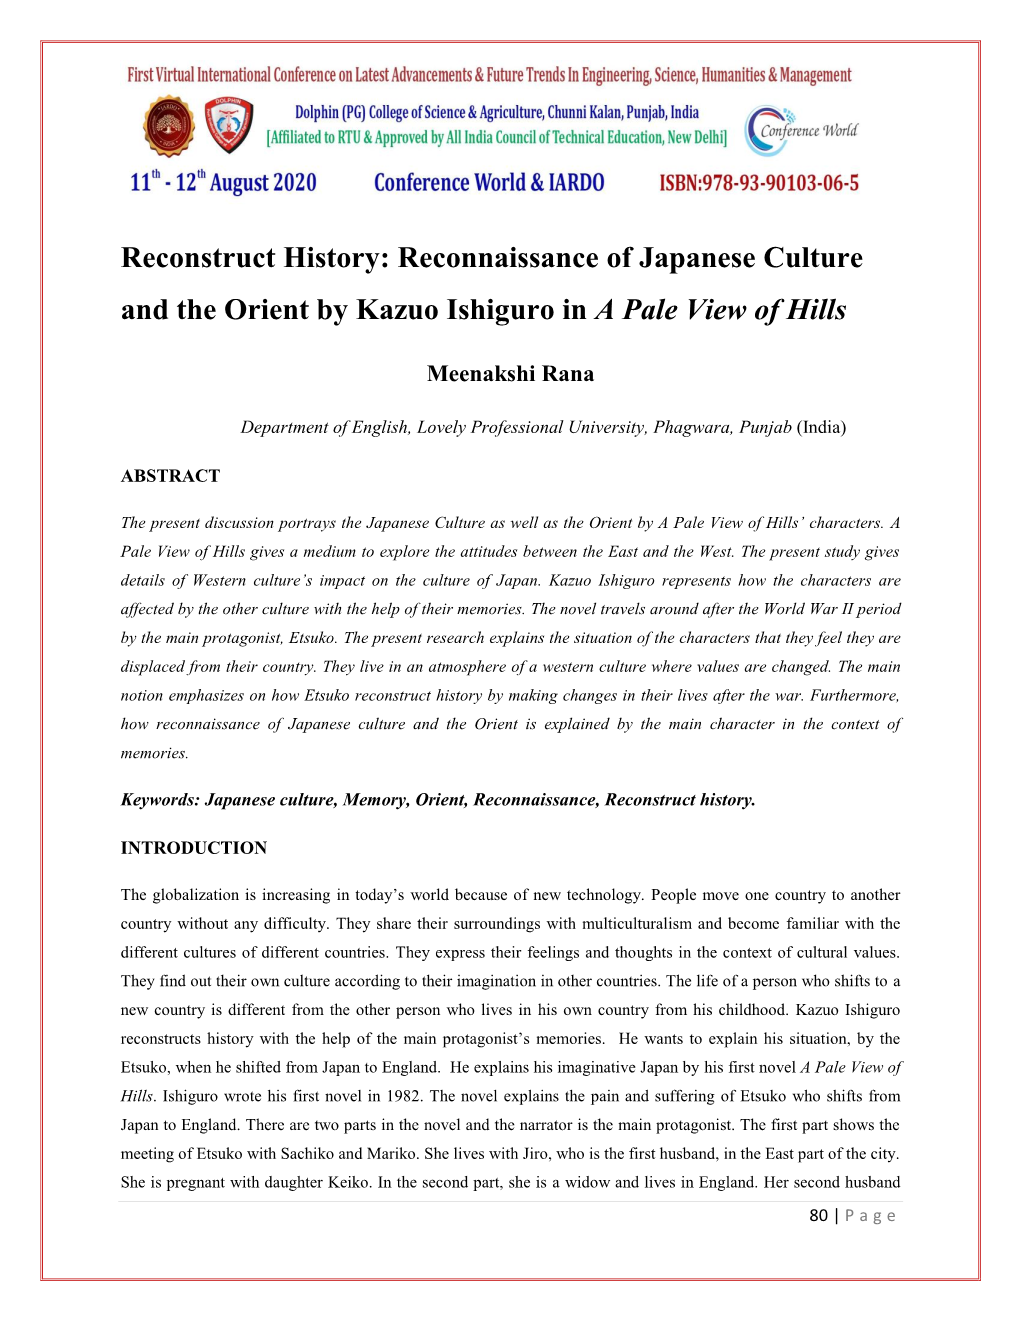 Reconnaissance of Japanese Culture and the Orient by Kazuo Ishiguro in a Pale View of Hills